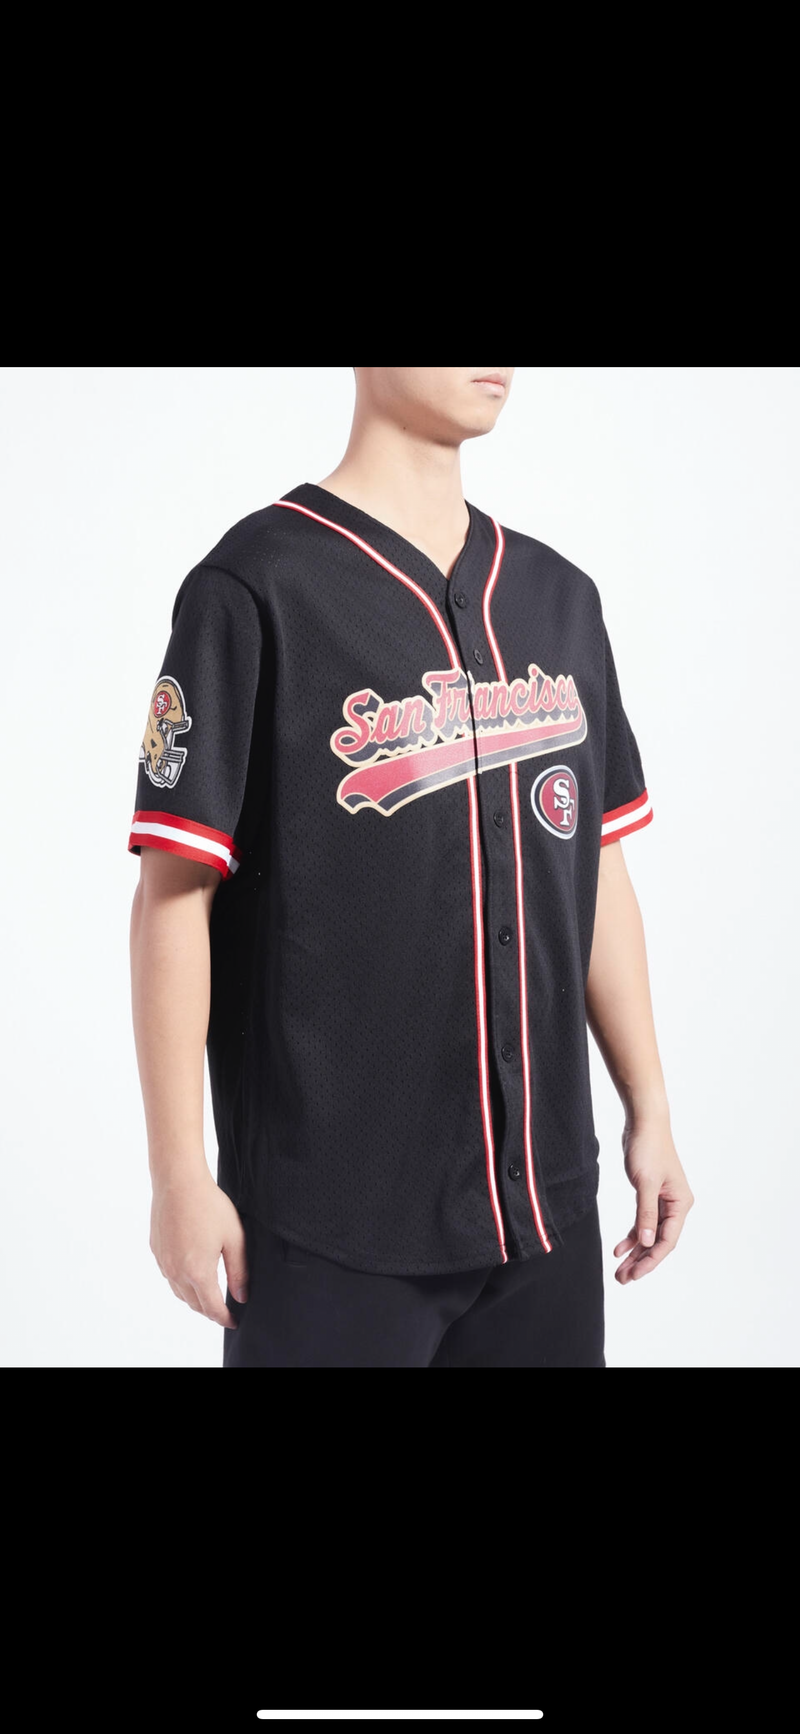 Pro Standard San Francisco 49ers Mesh Pro Team Jersey (Black/Red) FS41410156 - Fresh N Fitted Inc